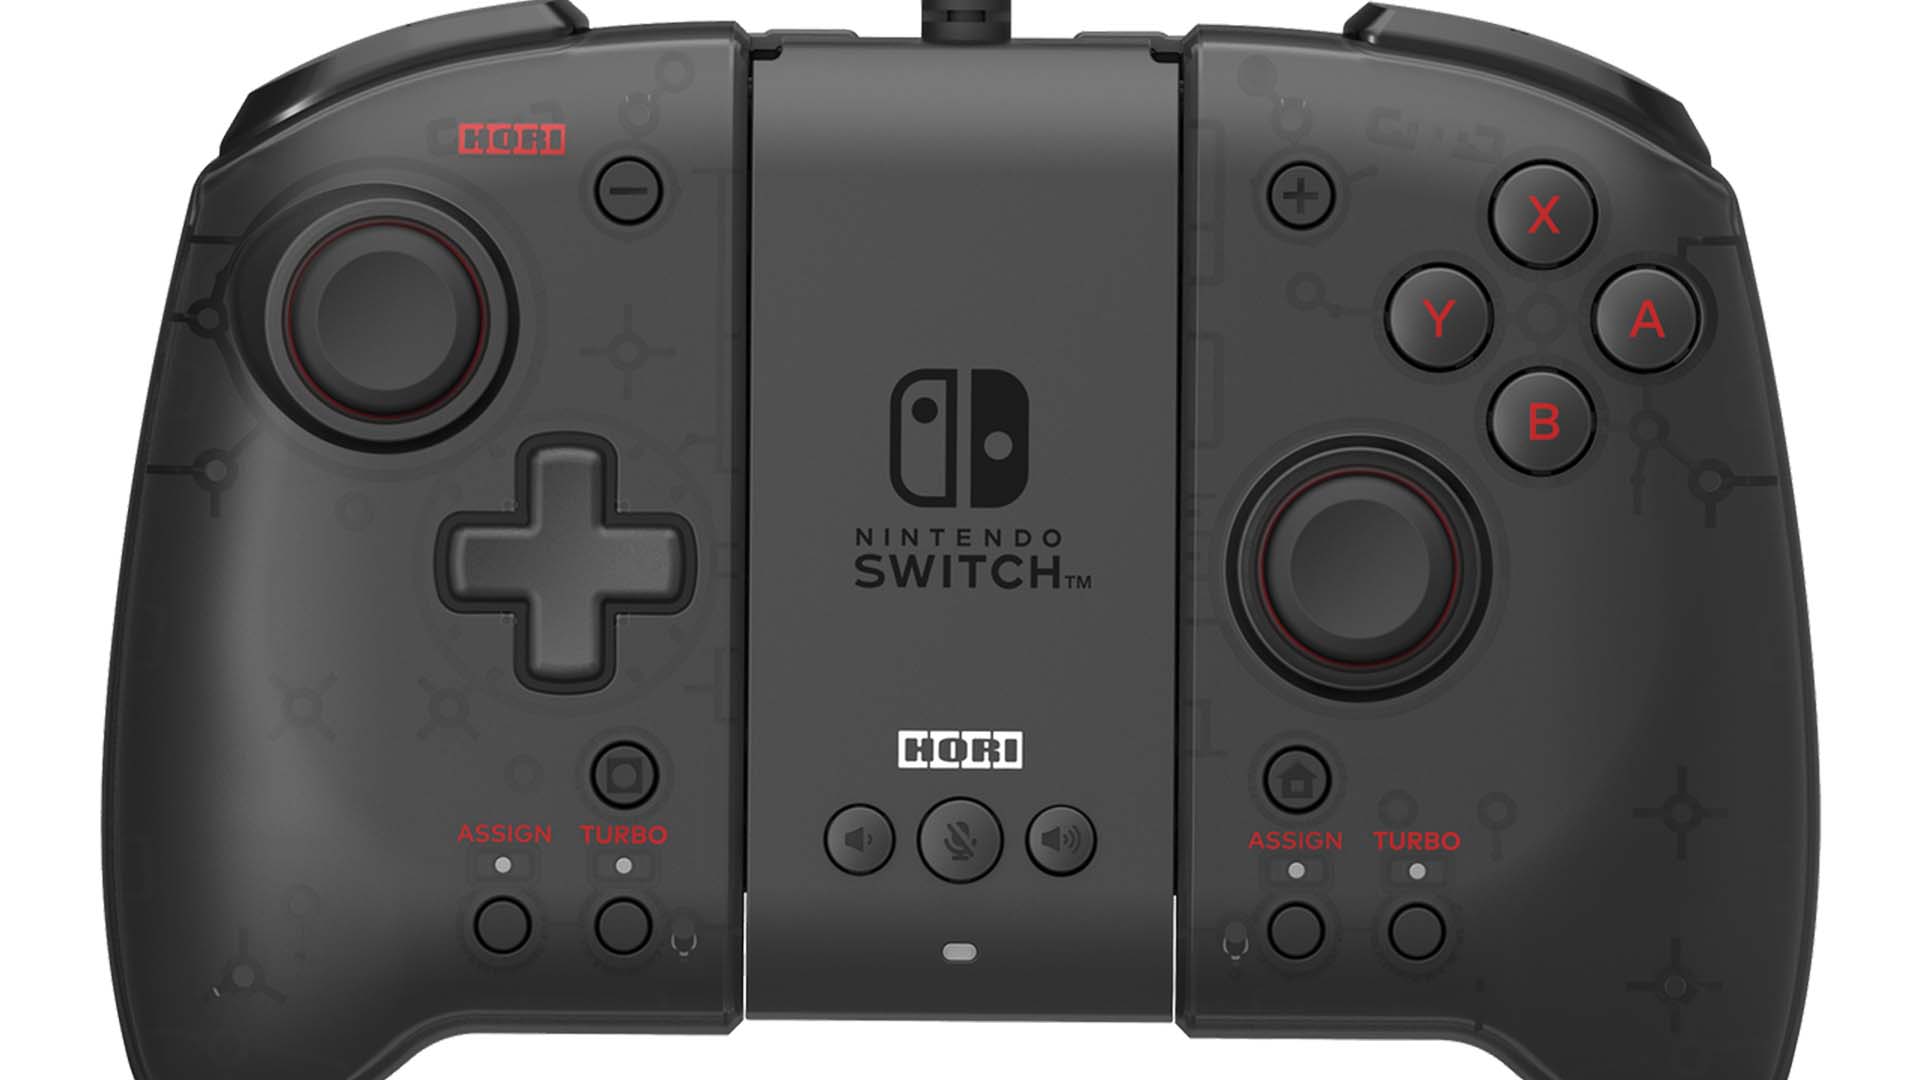 Hori Split Pad Pro review: The 'pro' Joy-Cons the Switch should have come  with